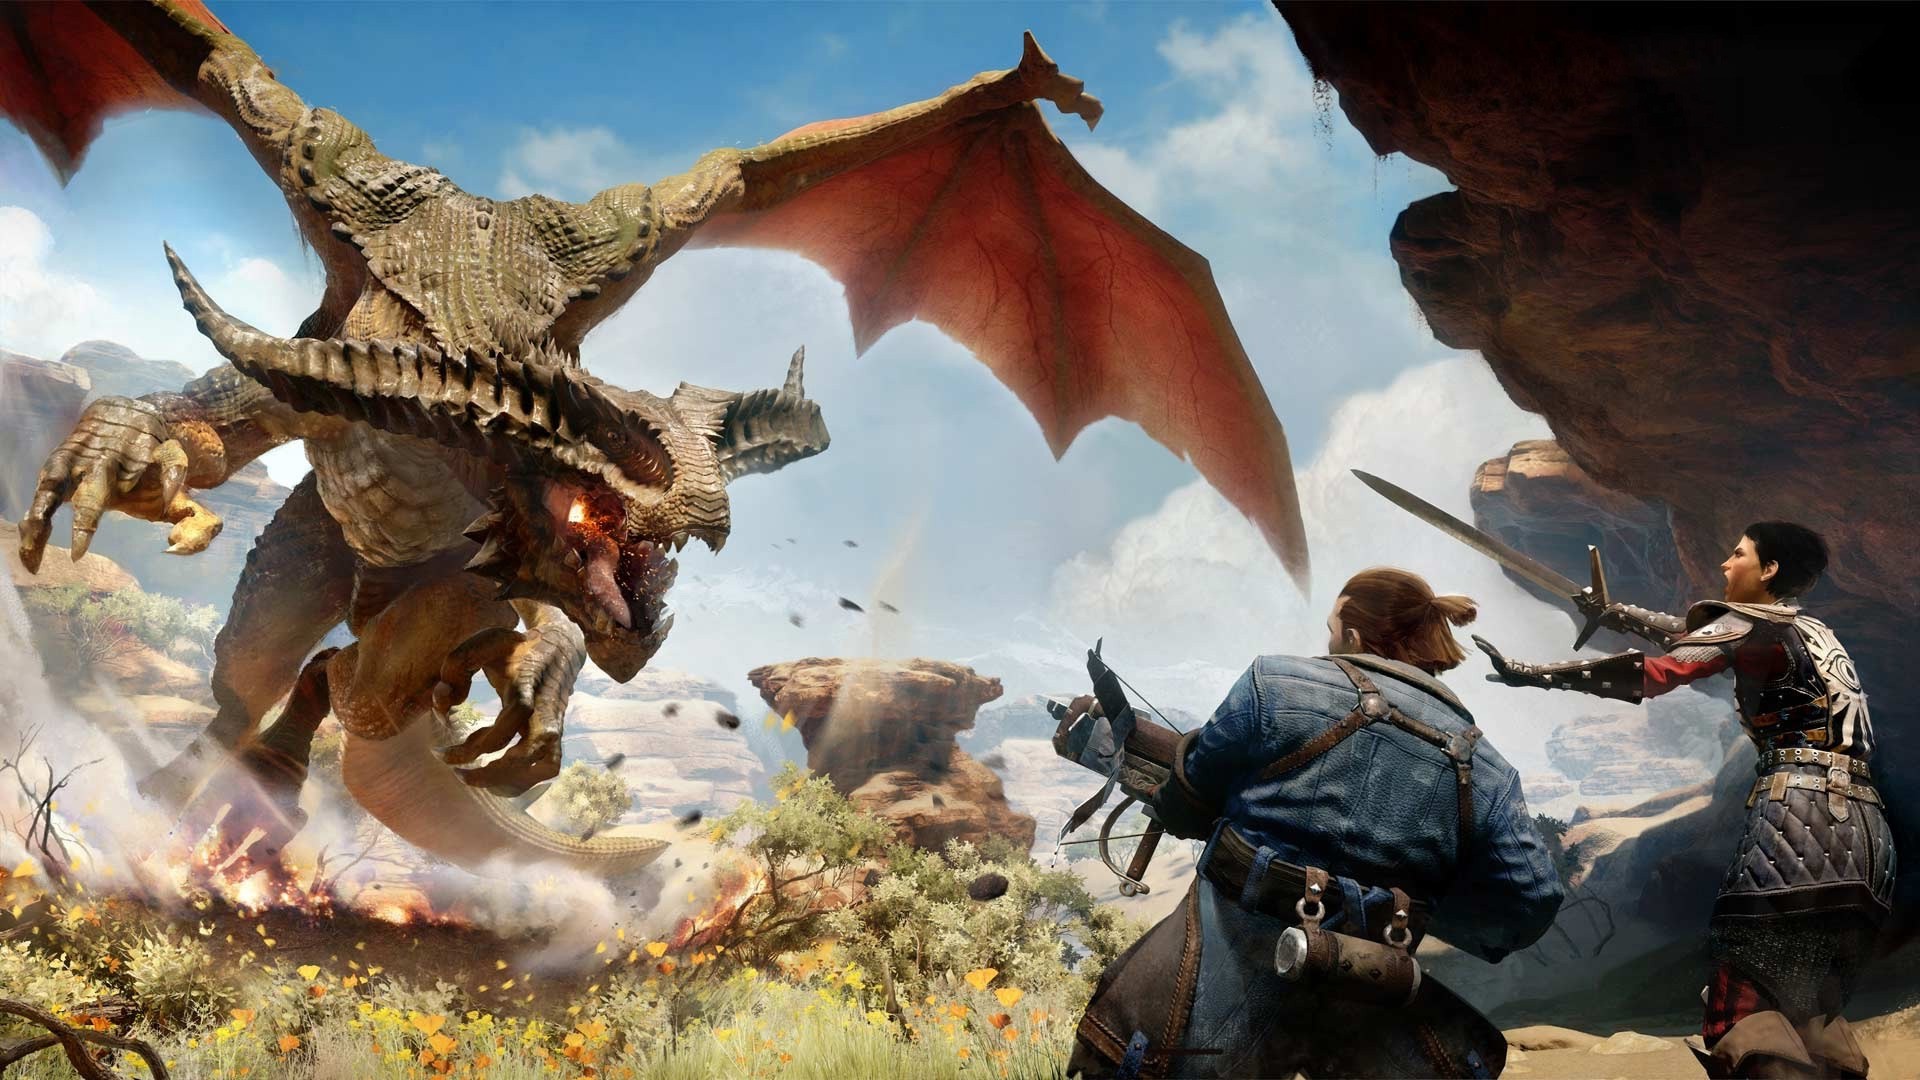 Hd Dragon Age Inquisition Wallpapers